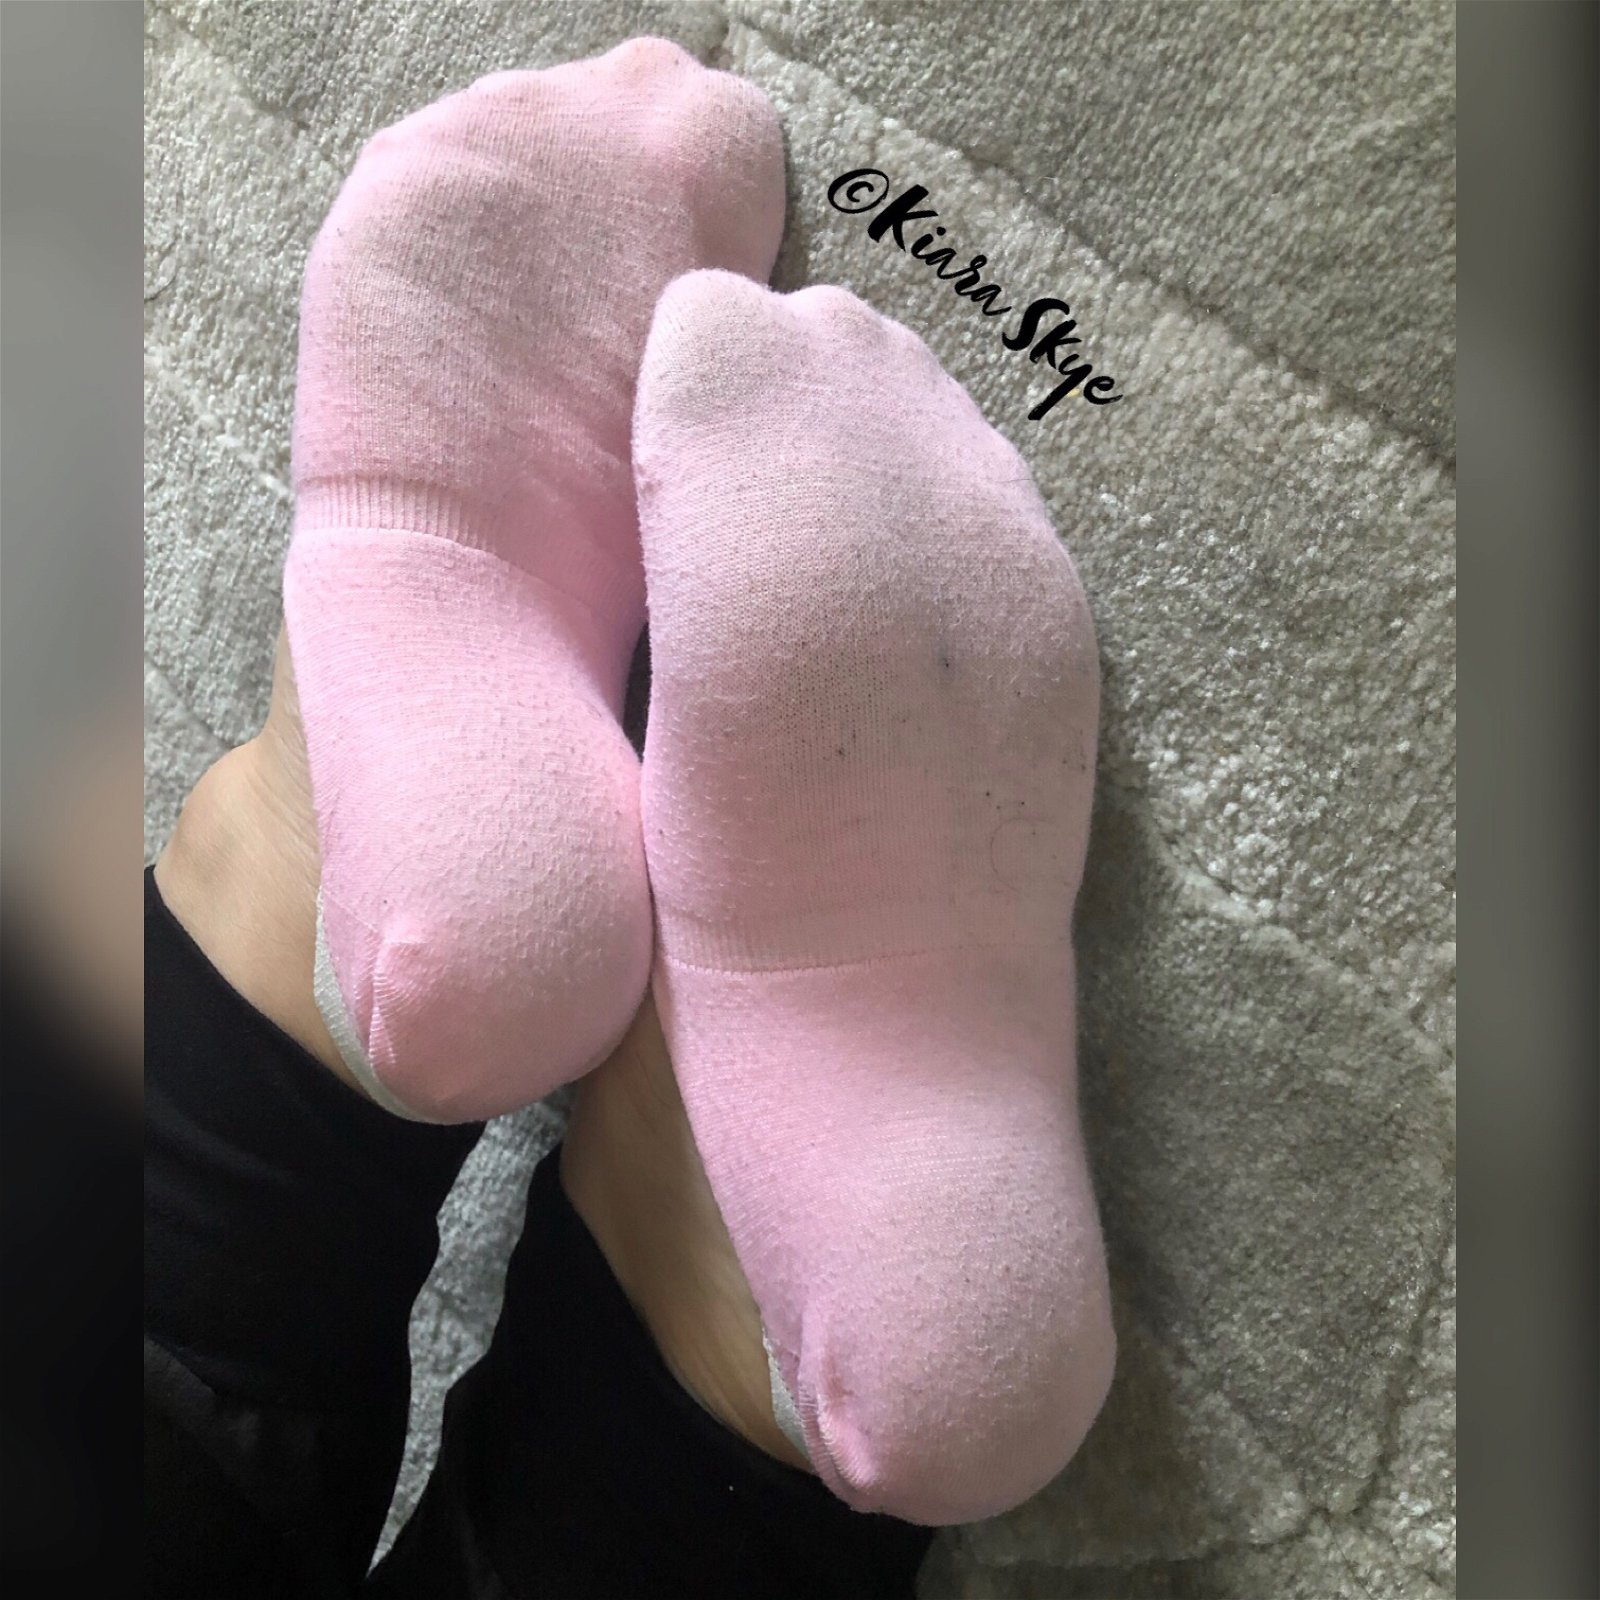 Photo by Kiara Skye with the username @KiaraSkye, who is a star user,  April 5, 2019 at 1:50 PM. The post is about the topic Hot Girls in Socks and the text says '🧦Pink #stinky #smelly #peds! #Sock lovers!.. you can bid on these dirty #wornsocks today! 💕 #feet #footfetish #smallfeet

🔗Link: http://www.ebanned.net/cgi-bin/auction/auction.cgi?category=wclothing23&item=1554847877'